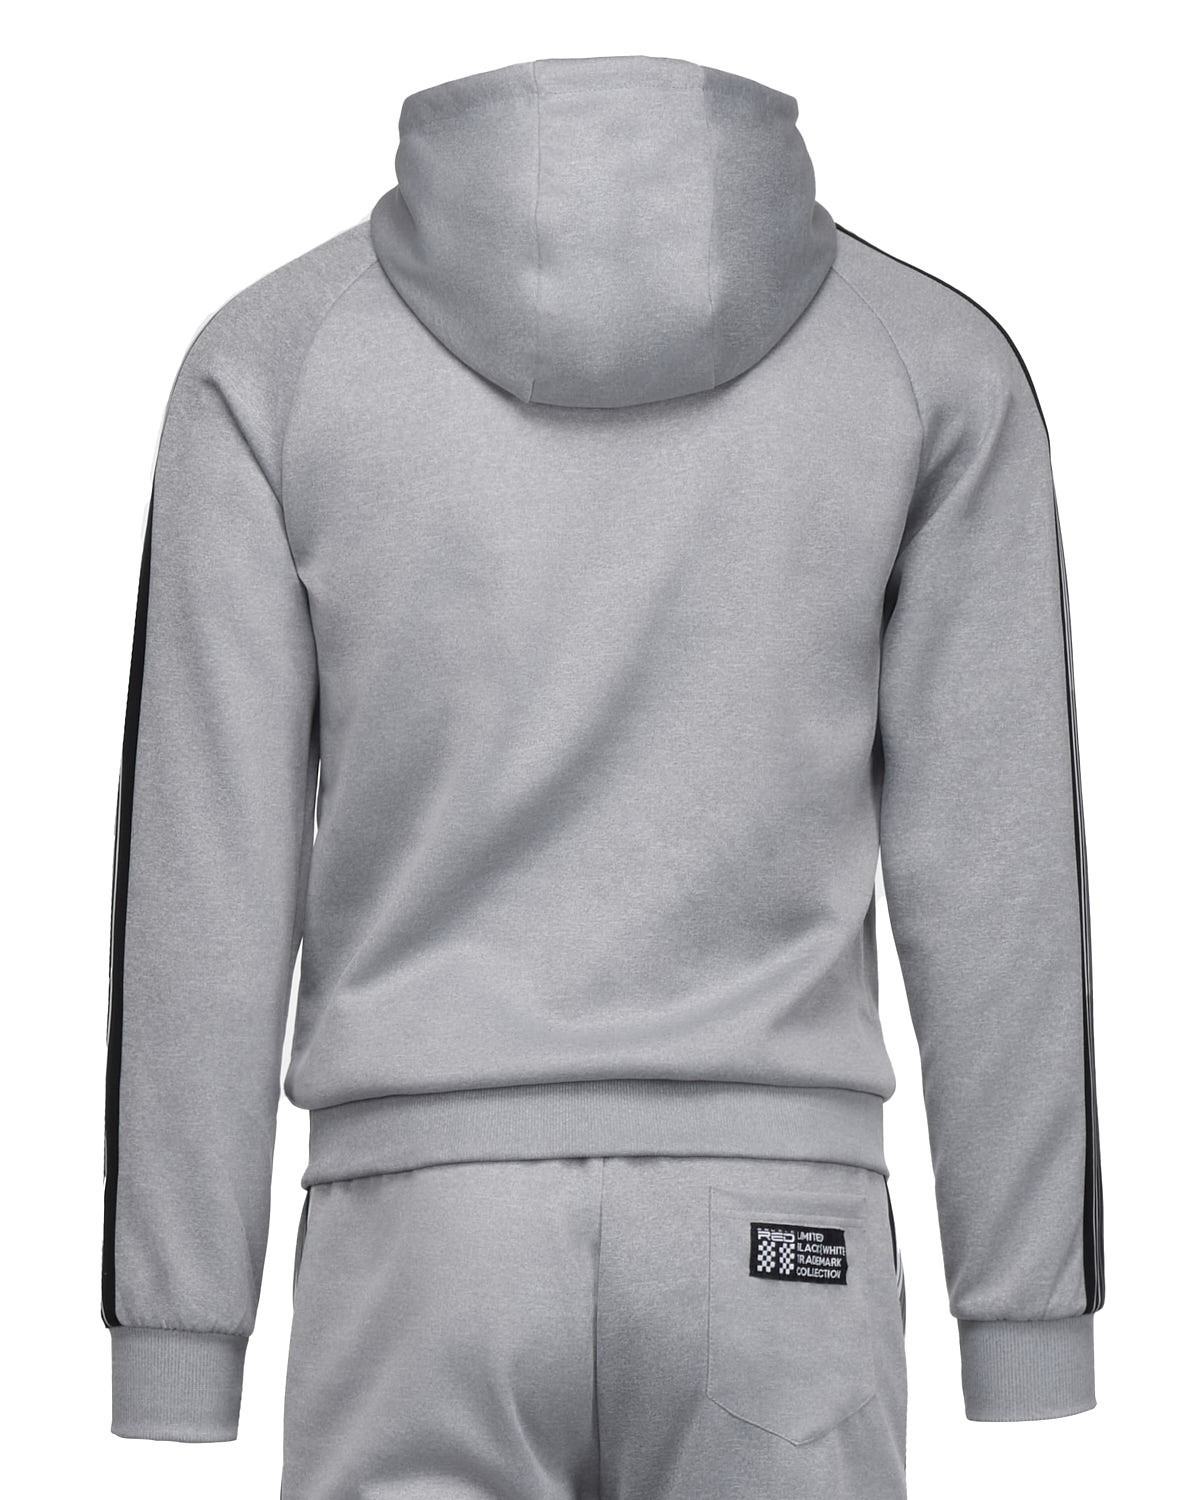 REFLEXERO SPORT IS YOUR GANG Tracksuit Silver